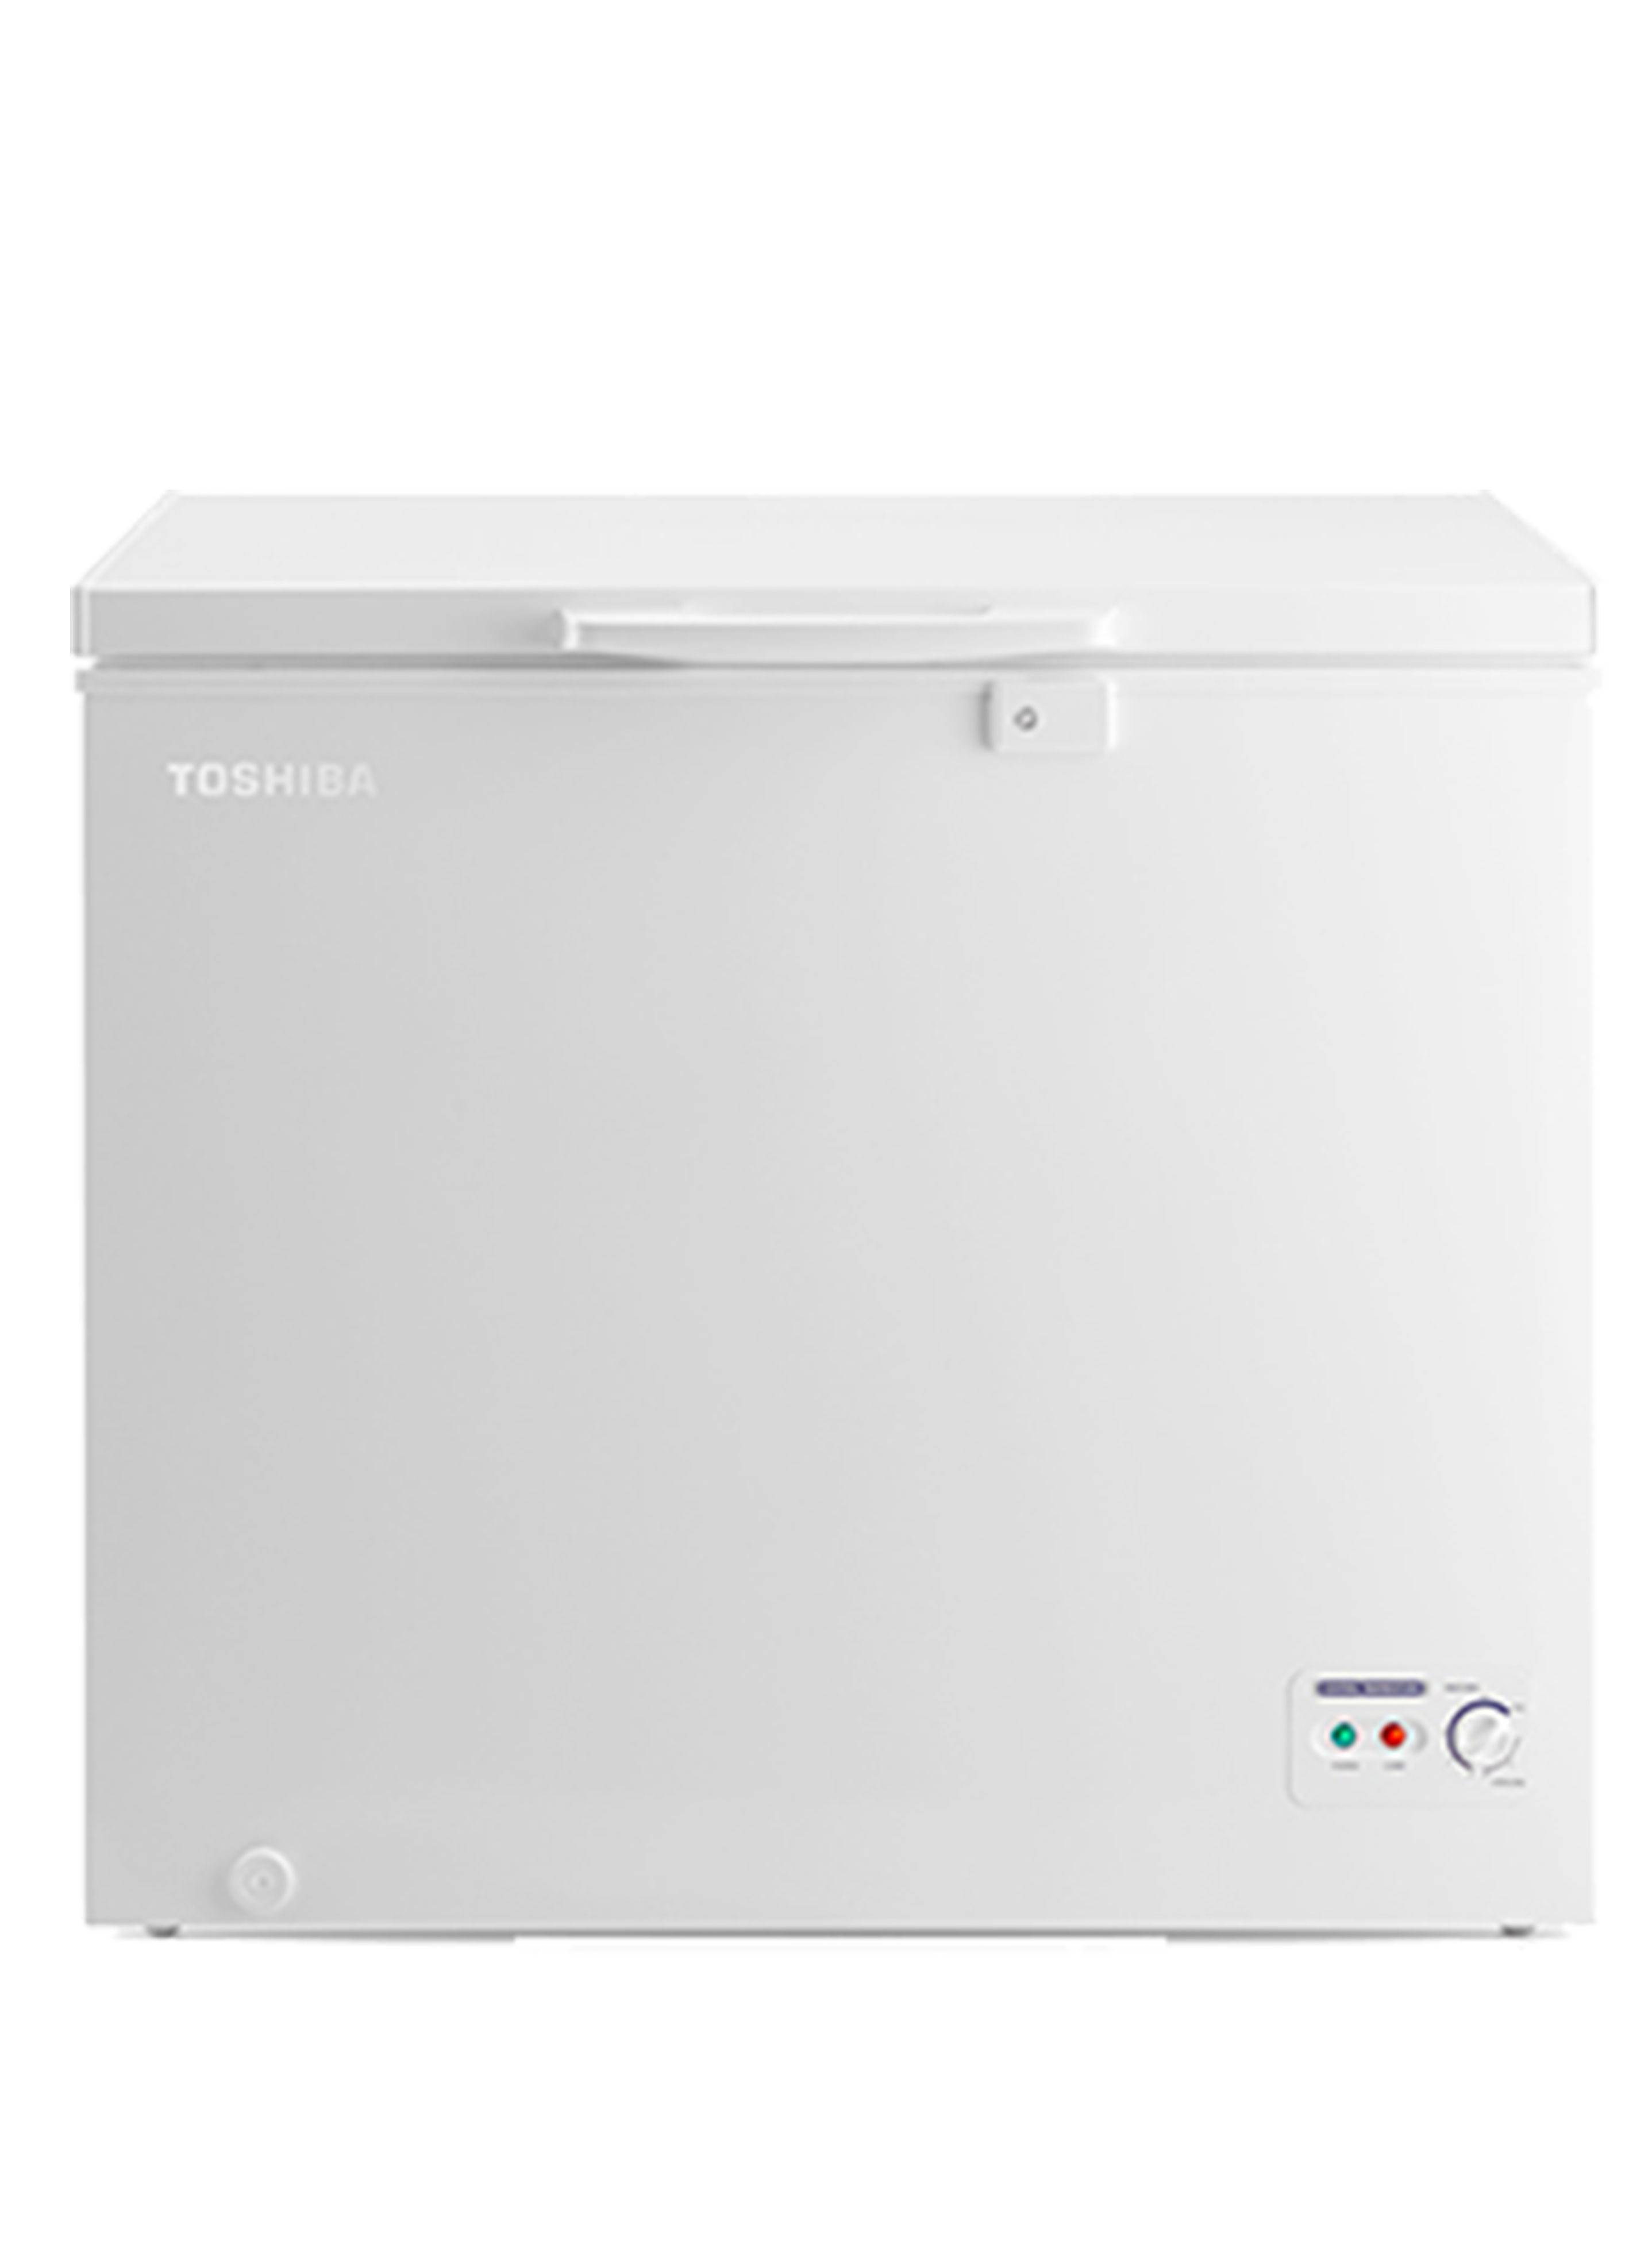 7 CU FT Chest Freezer | Toshiba Middle East